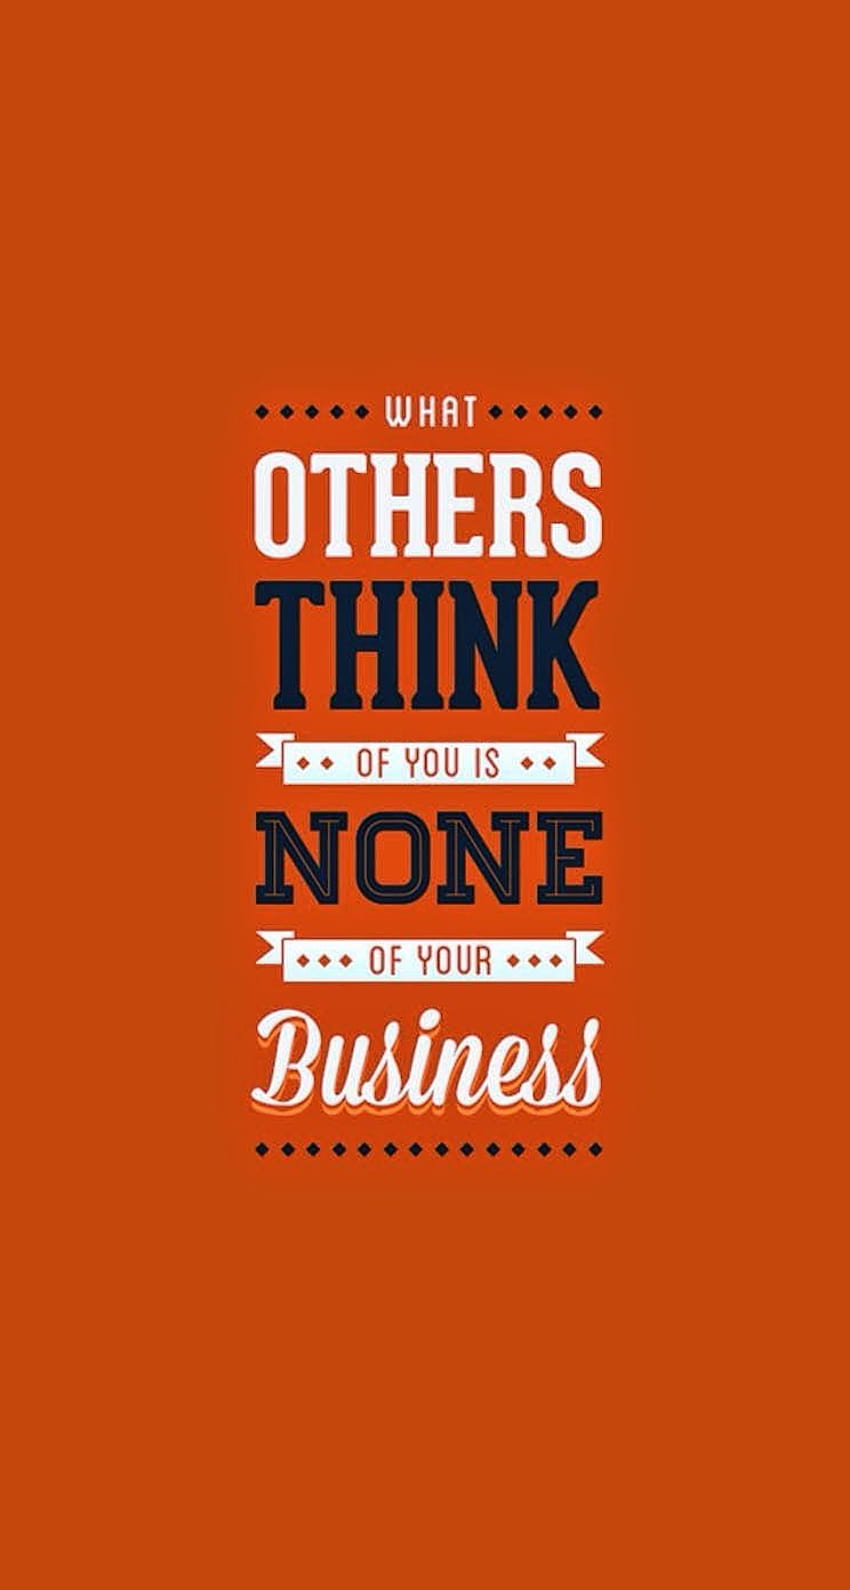 Others Think. iPhone Quote HD phone wallpaper